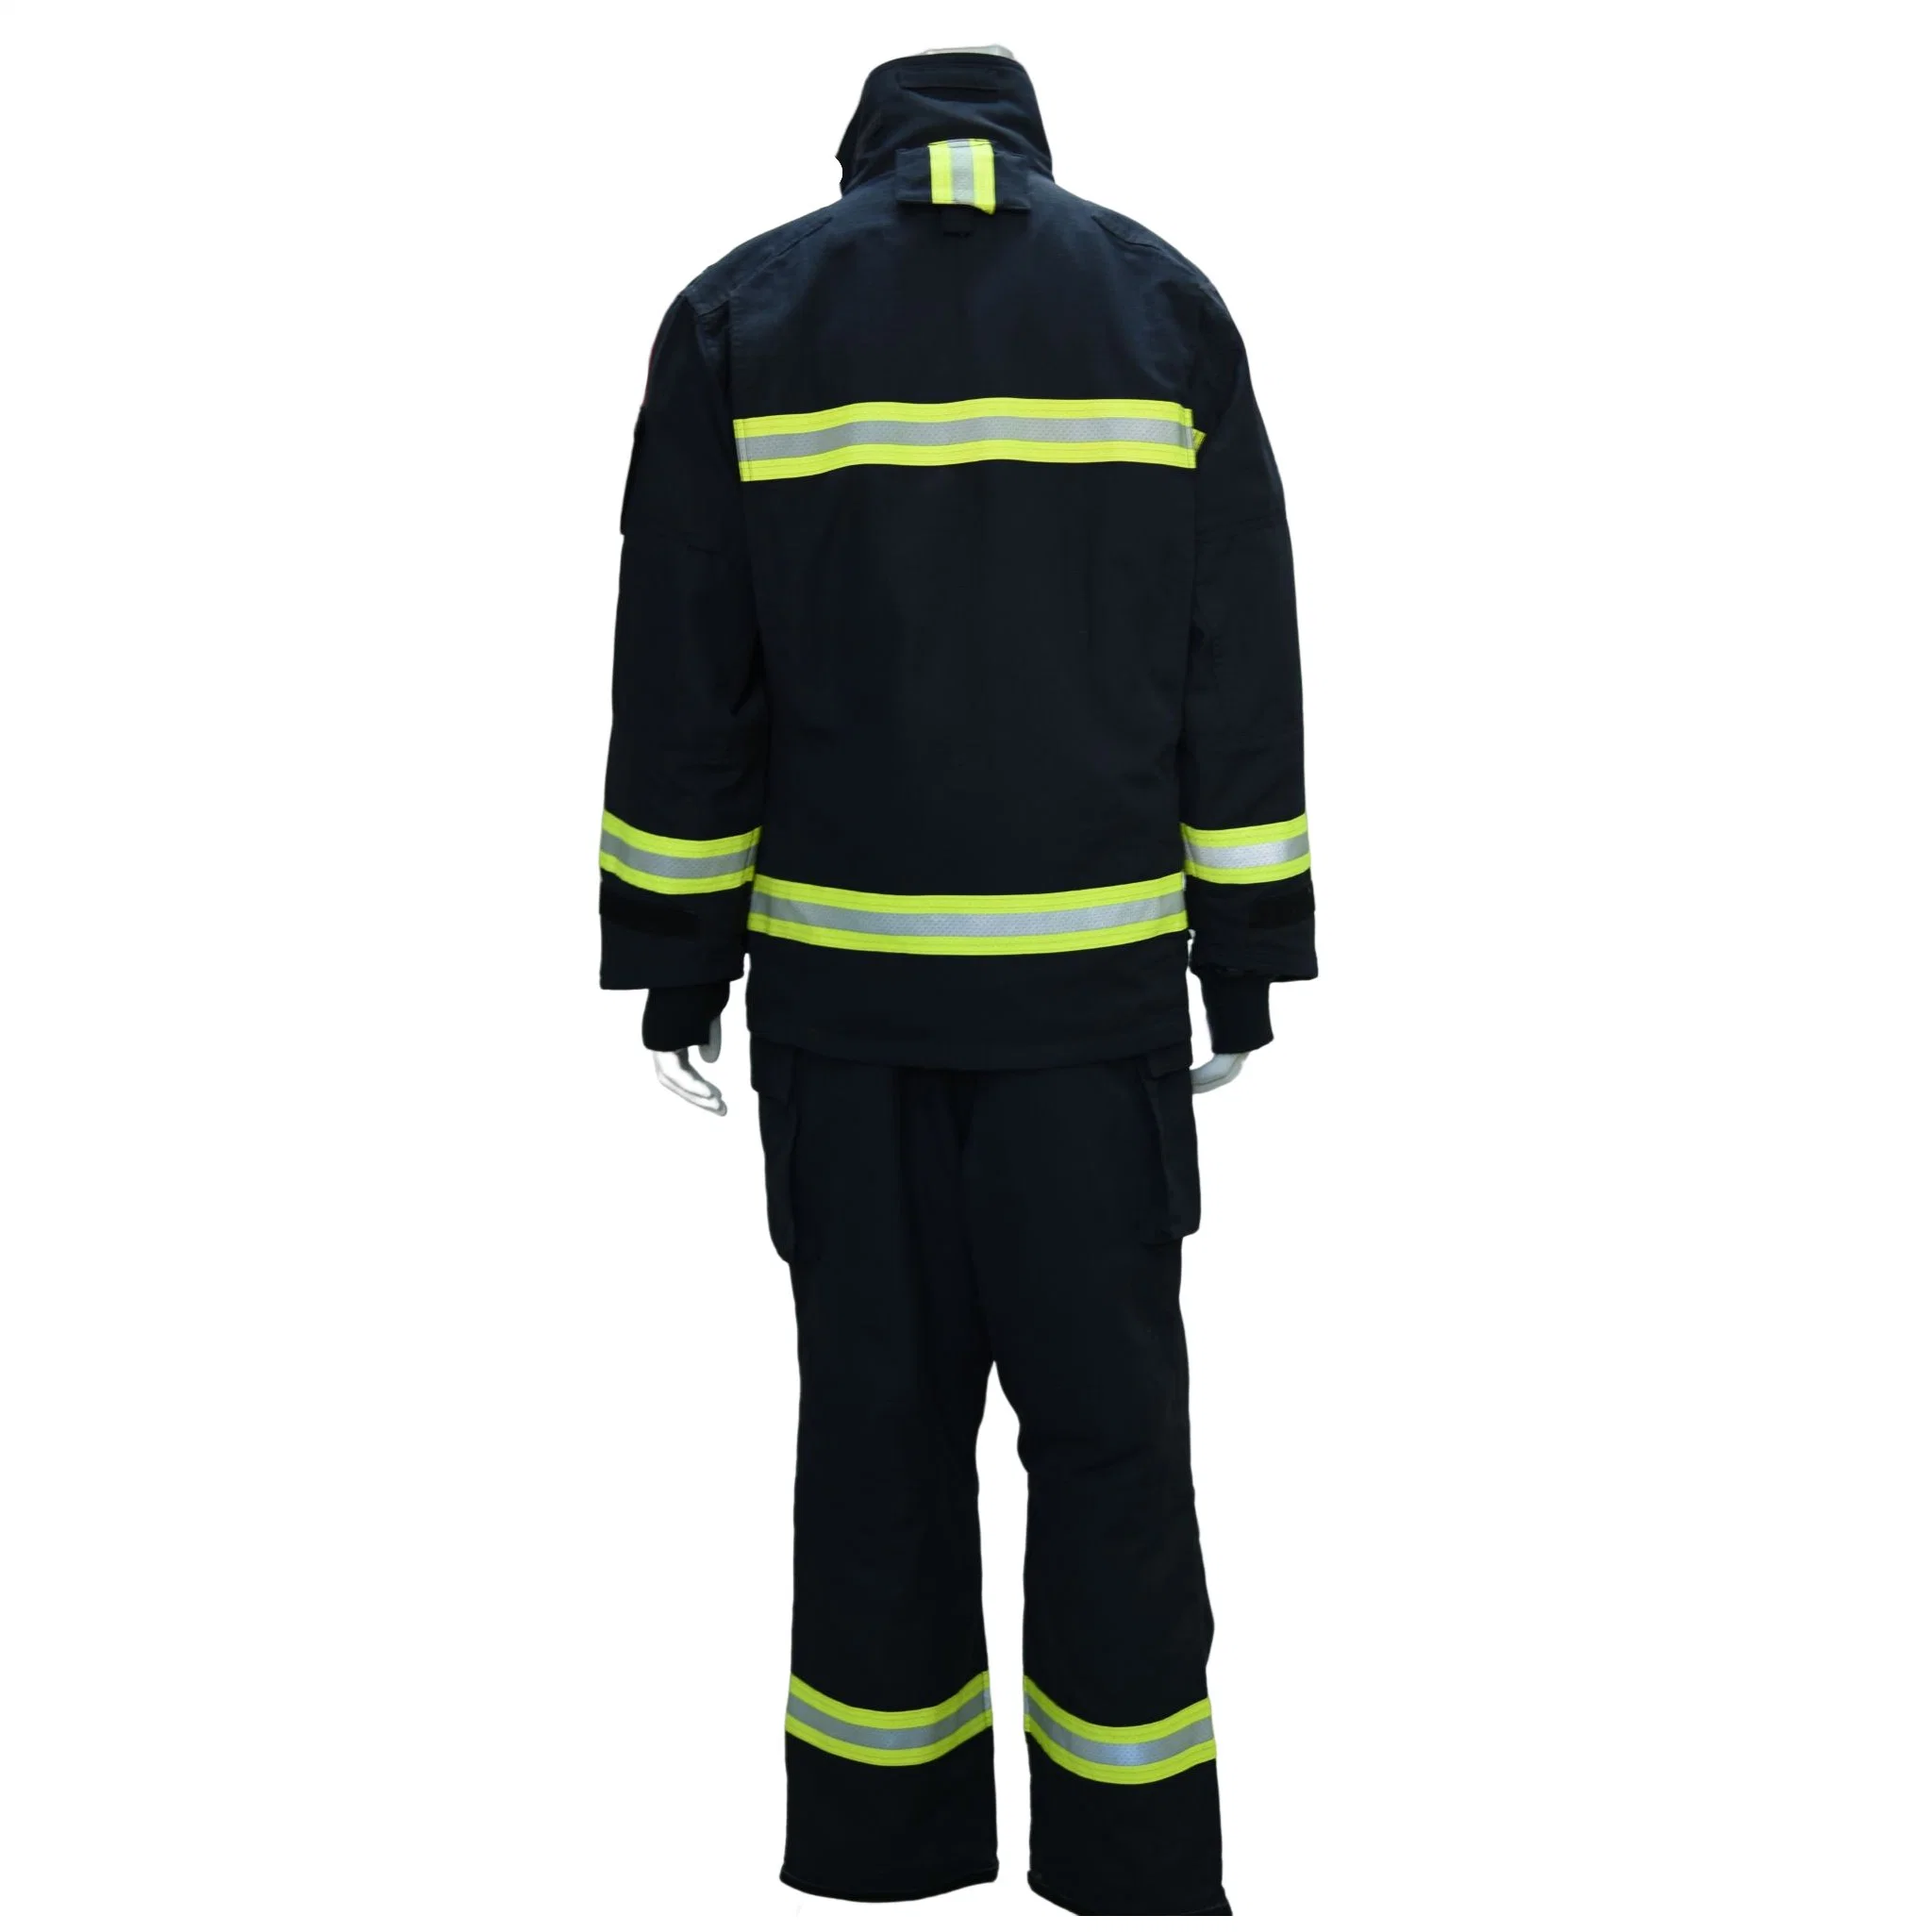 Fire Fighting Clothing Safety Wear Fireman Suit